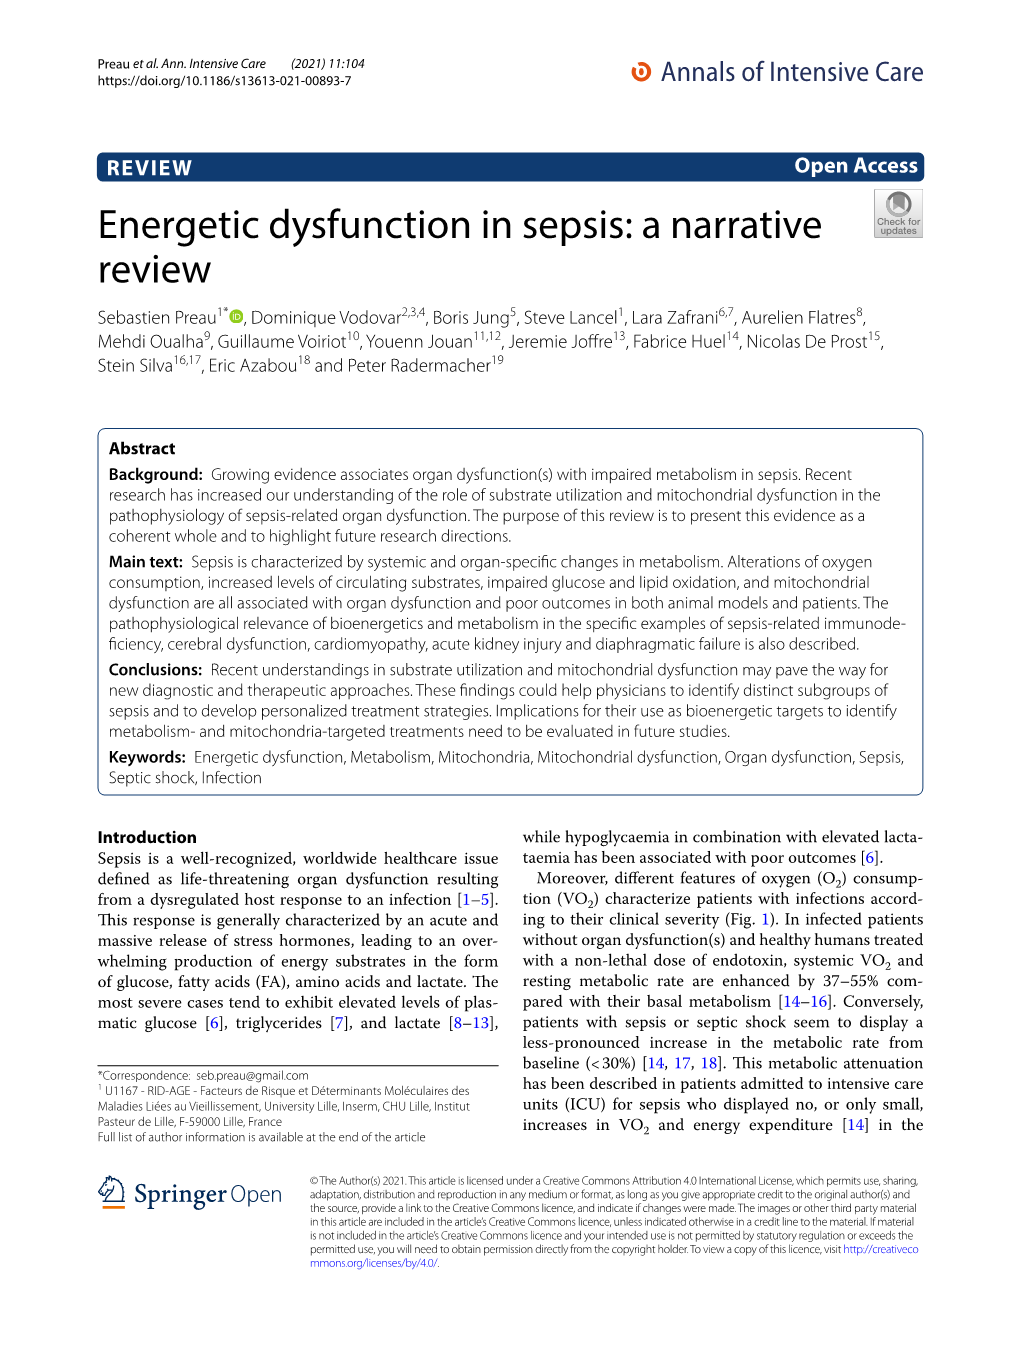 Energetic Dysfunction in Sepsis: a Narrative Review